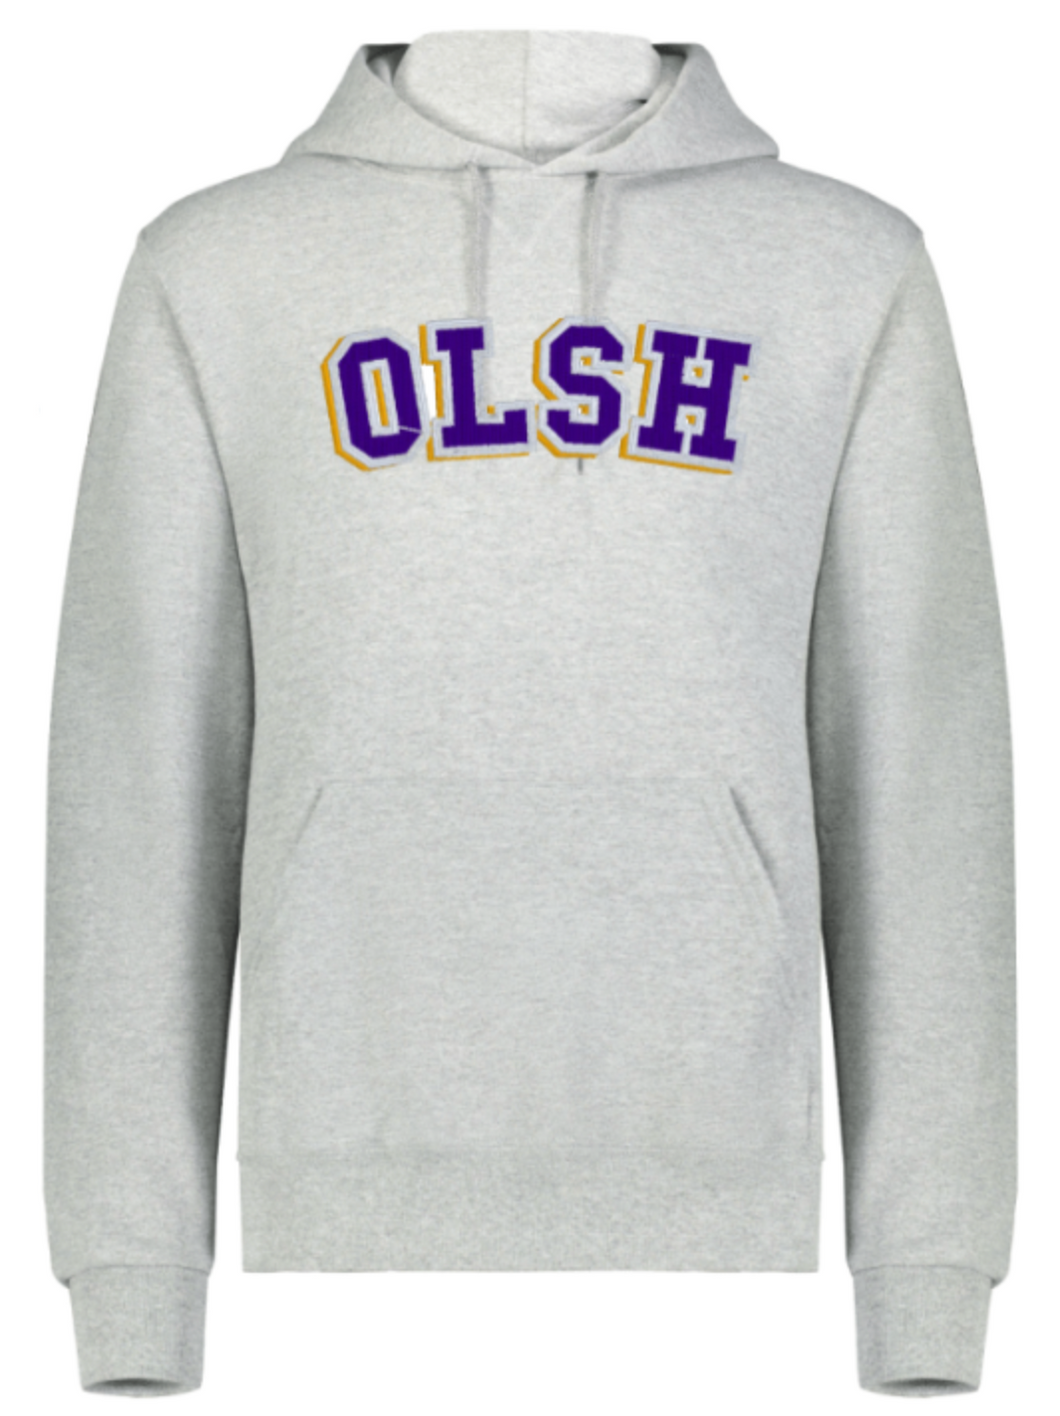 OLSH ADULT RUSSELL BRAND FULLY EMBROIDERED HOODED SWEATSHIRT